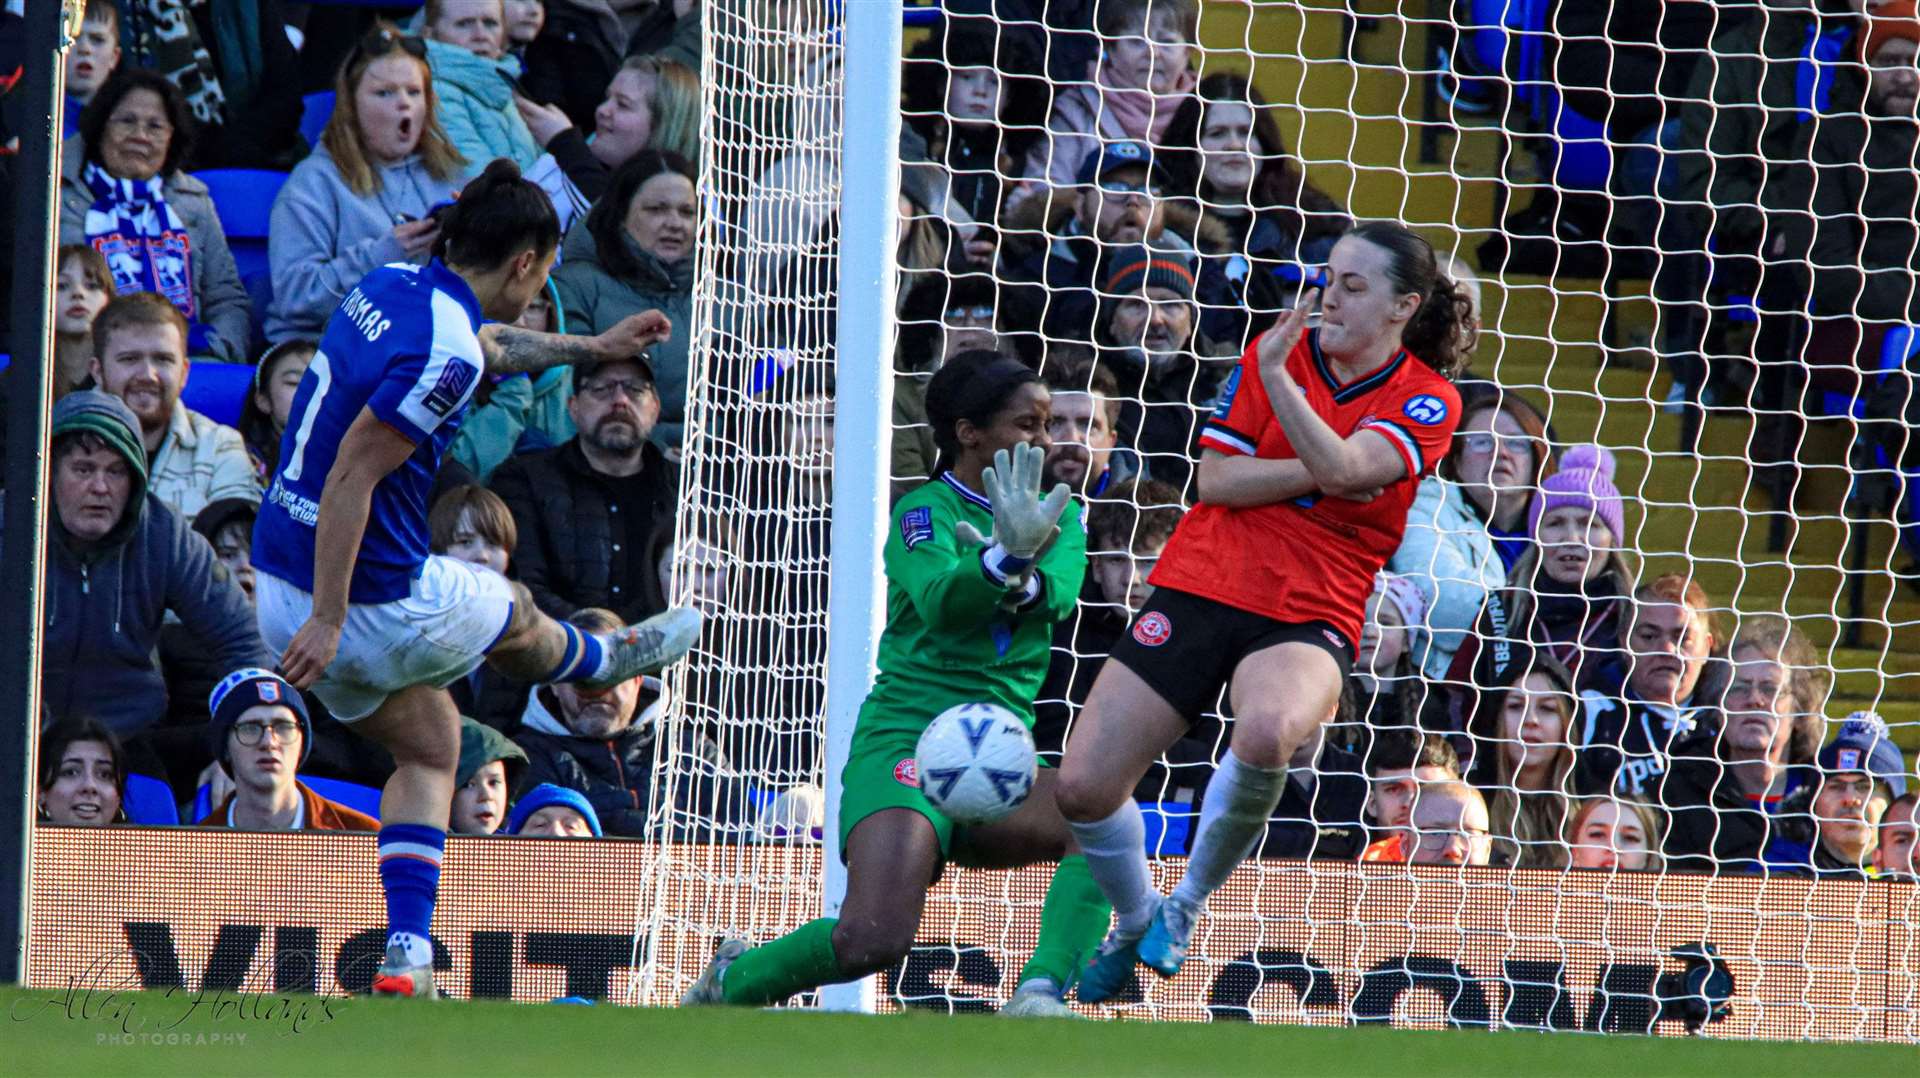 Chatham Town Women recently played Ipswich Town at Portman Road Picture: Allen Hollands